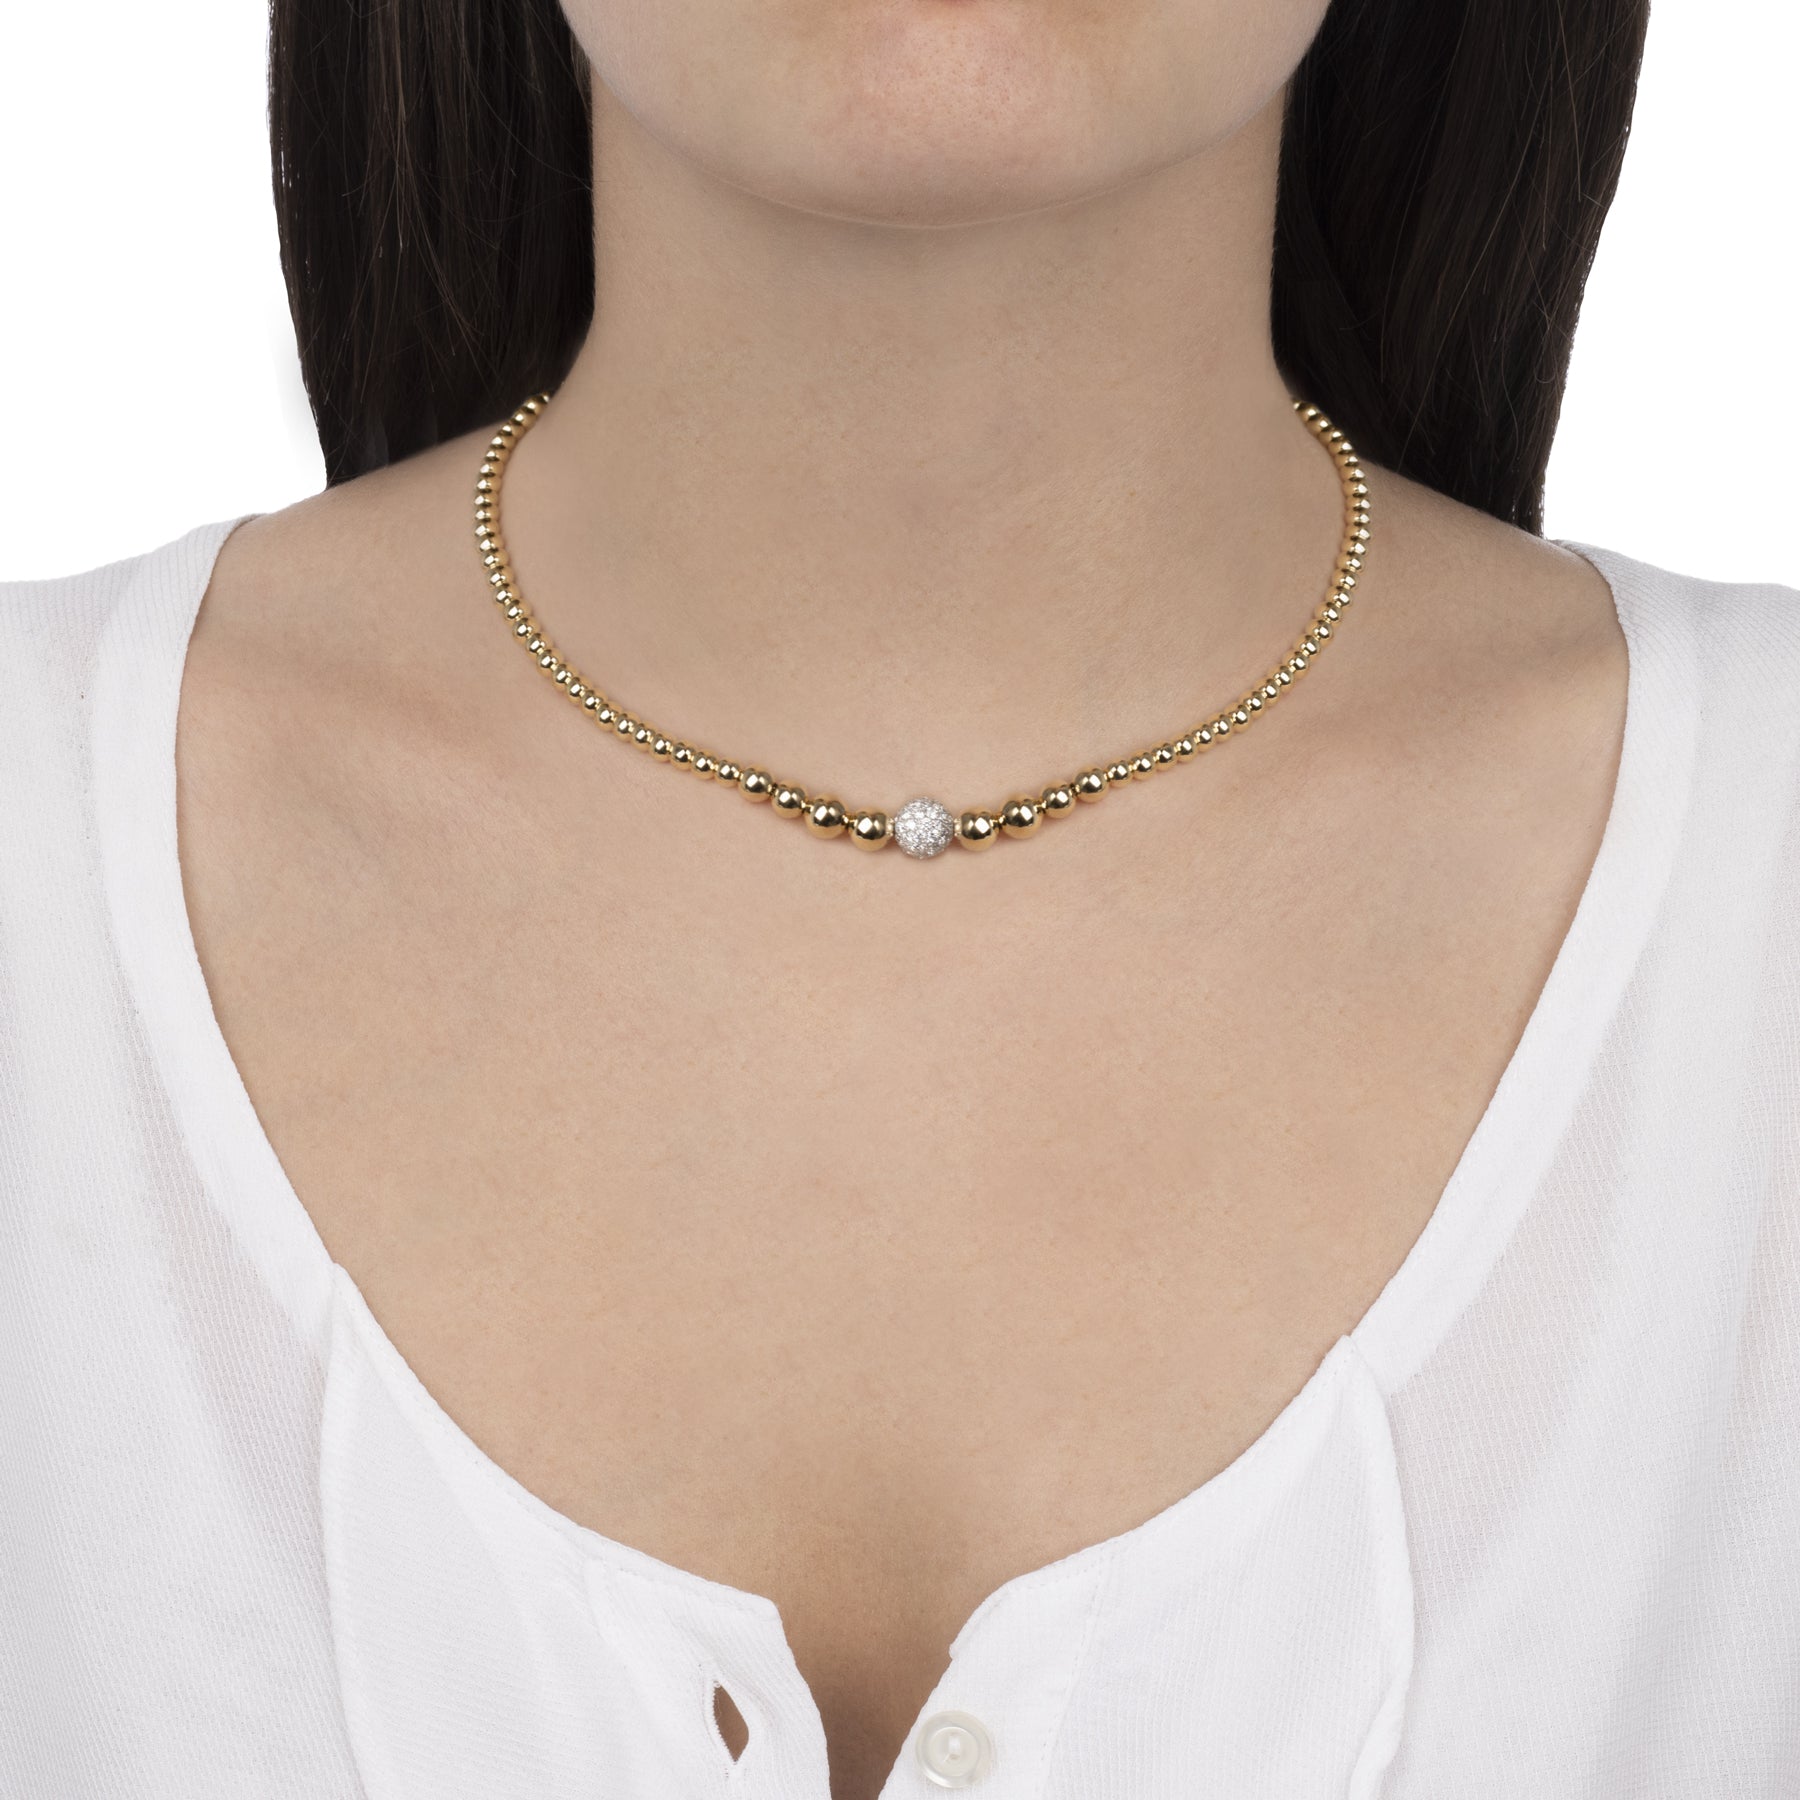 Universo Medium Necklace Graduated Spheres Polished Yellow Gold and Diamonds